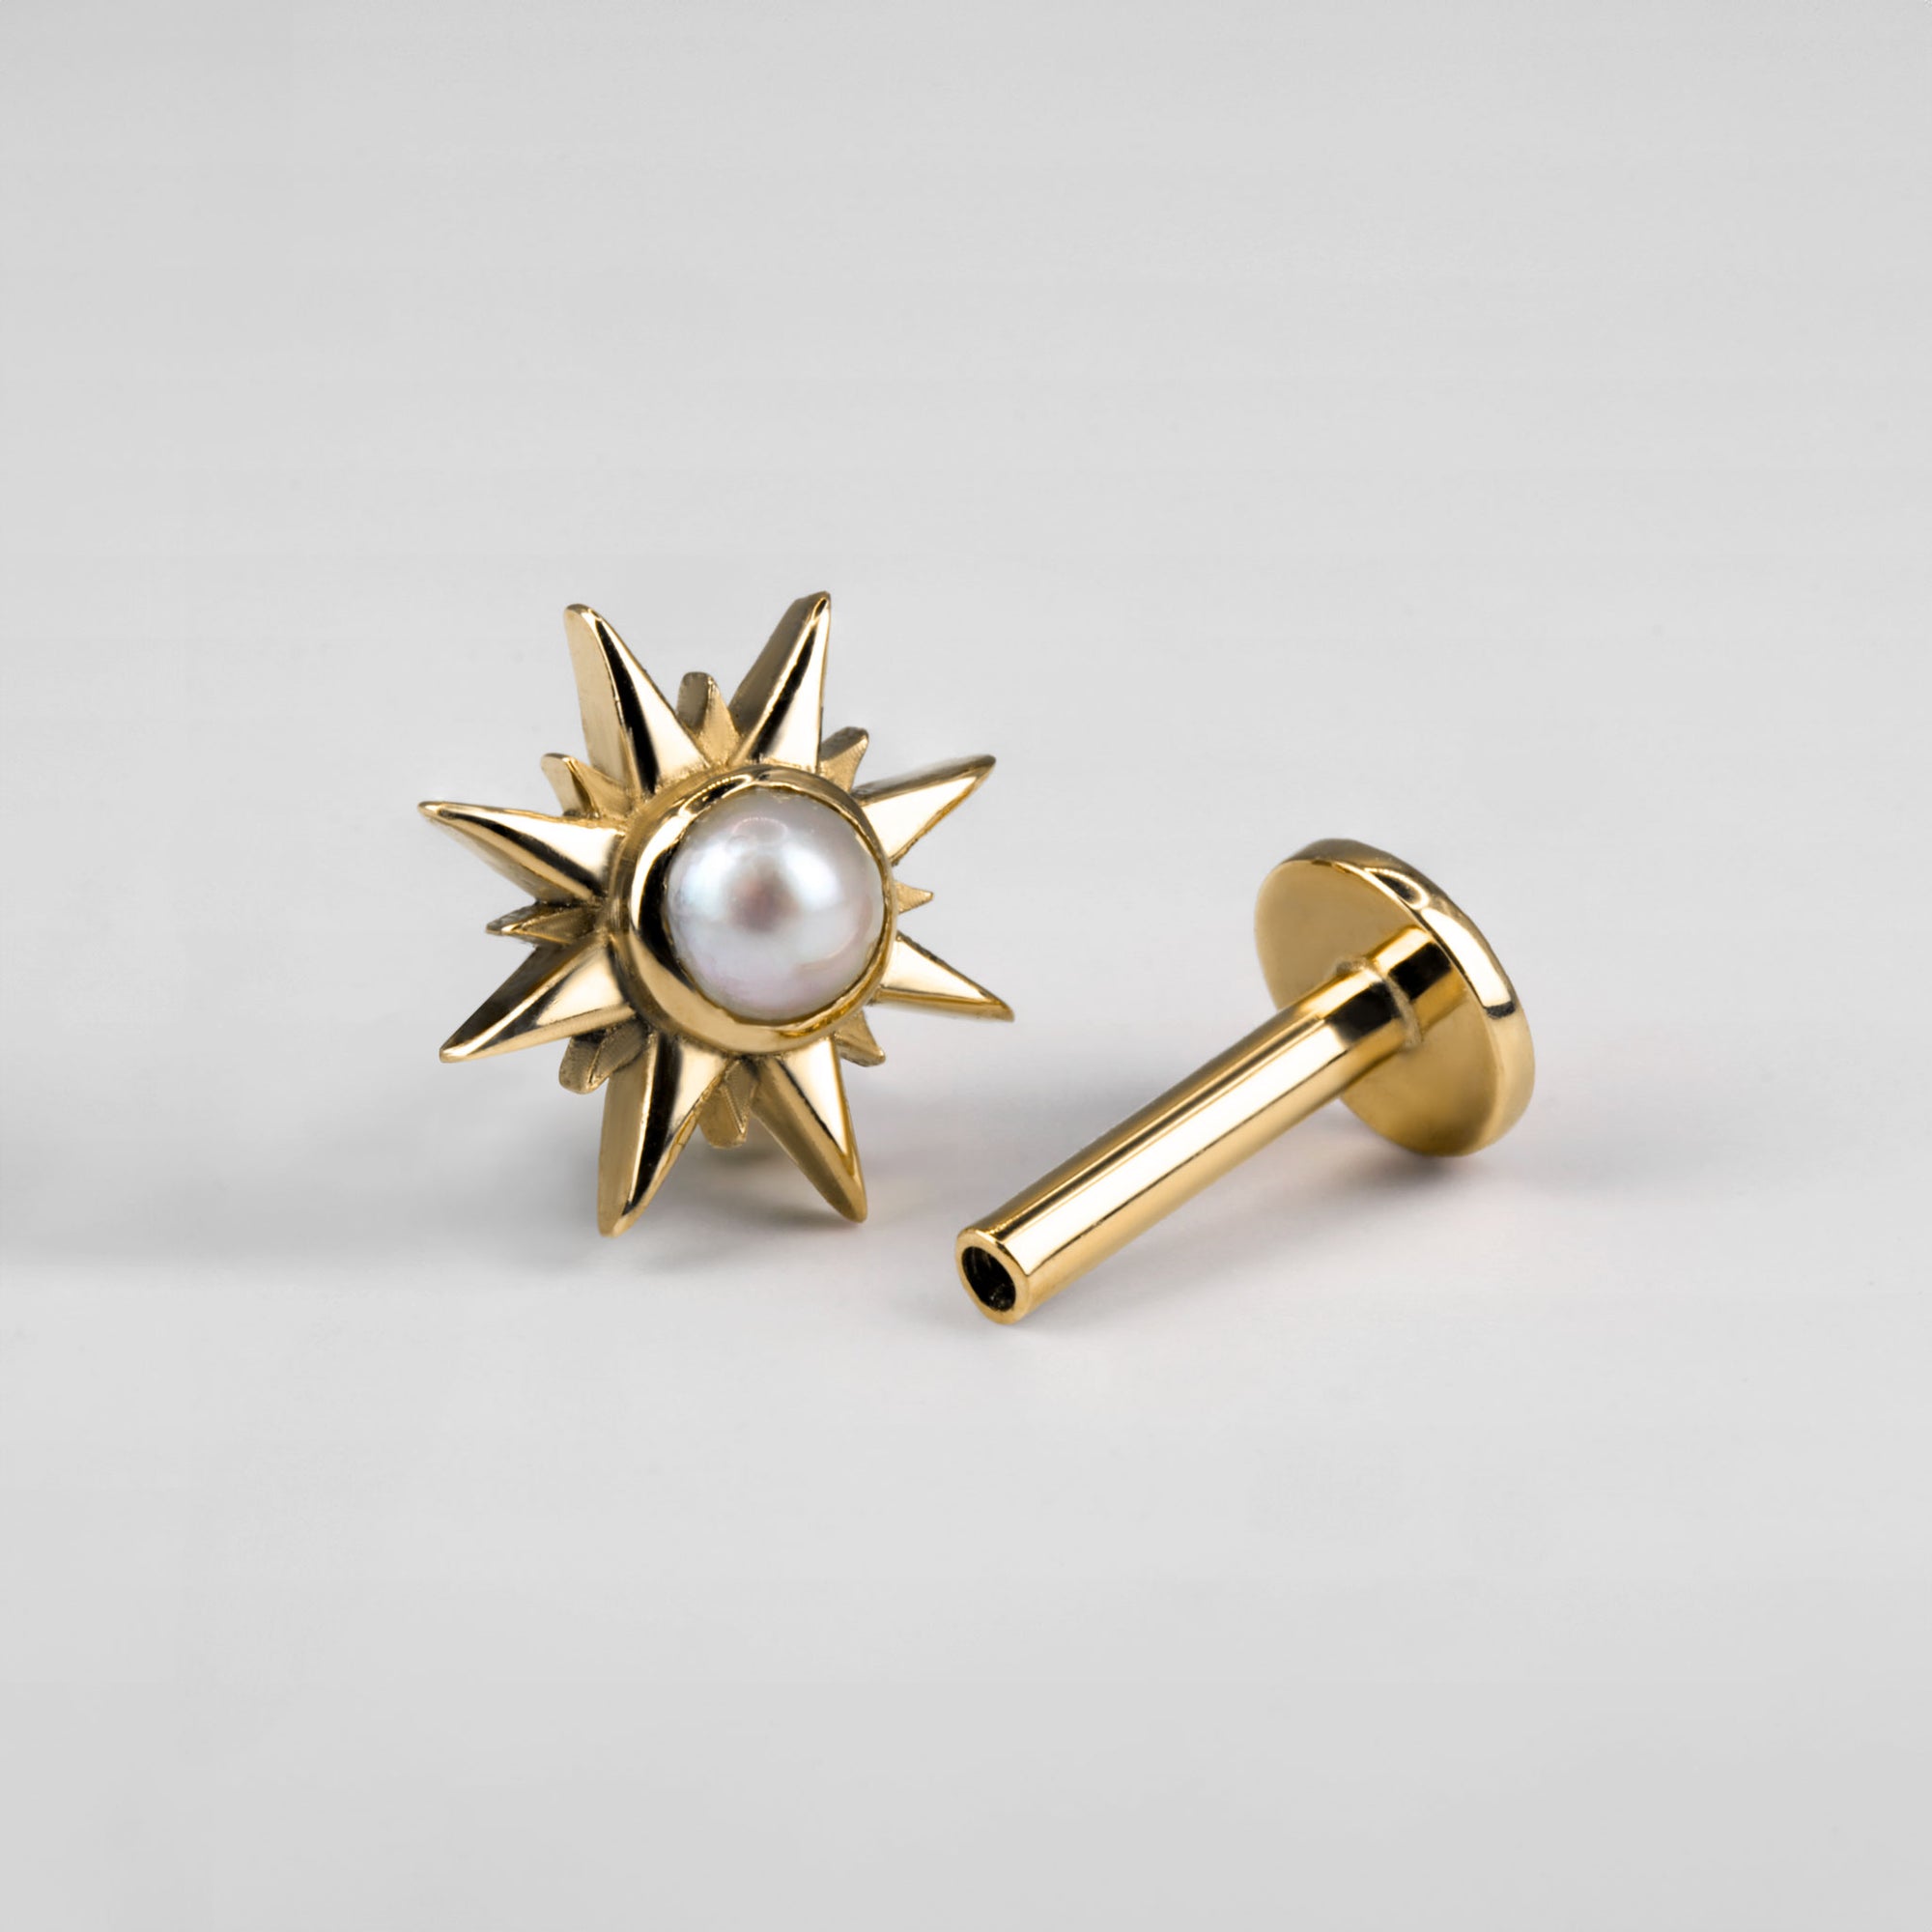 18k yellow gold star-shaped ear labret piercing stud with pearl